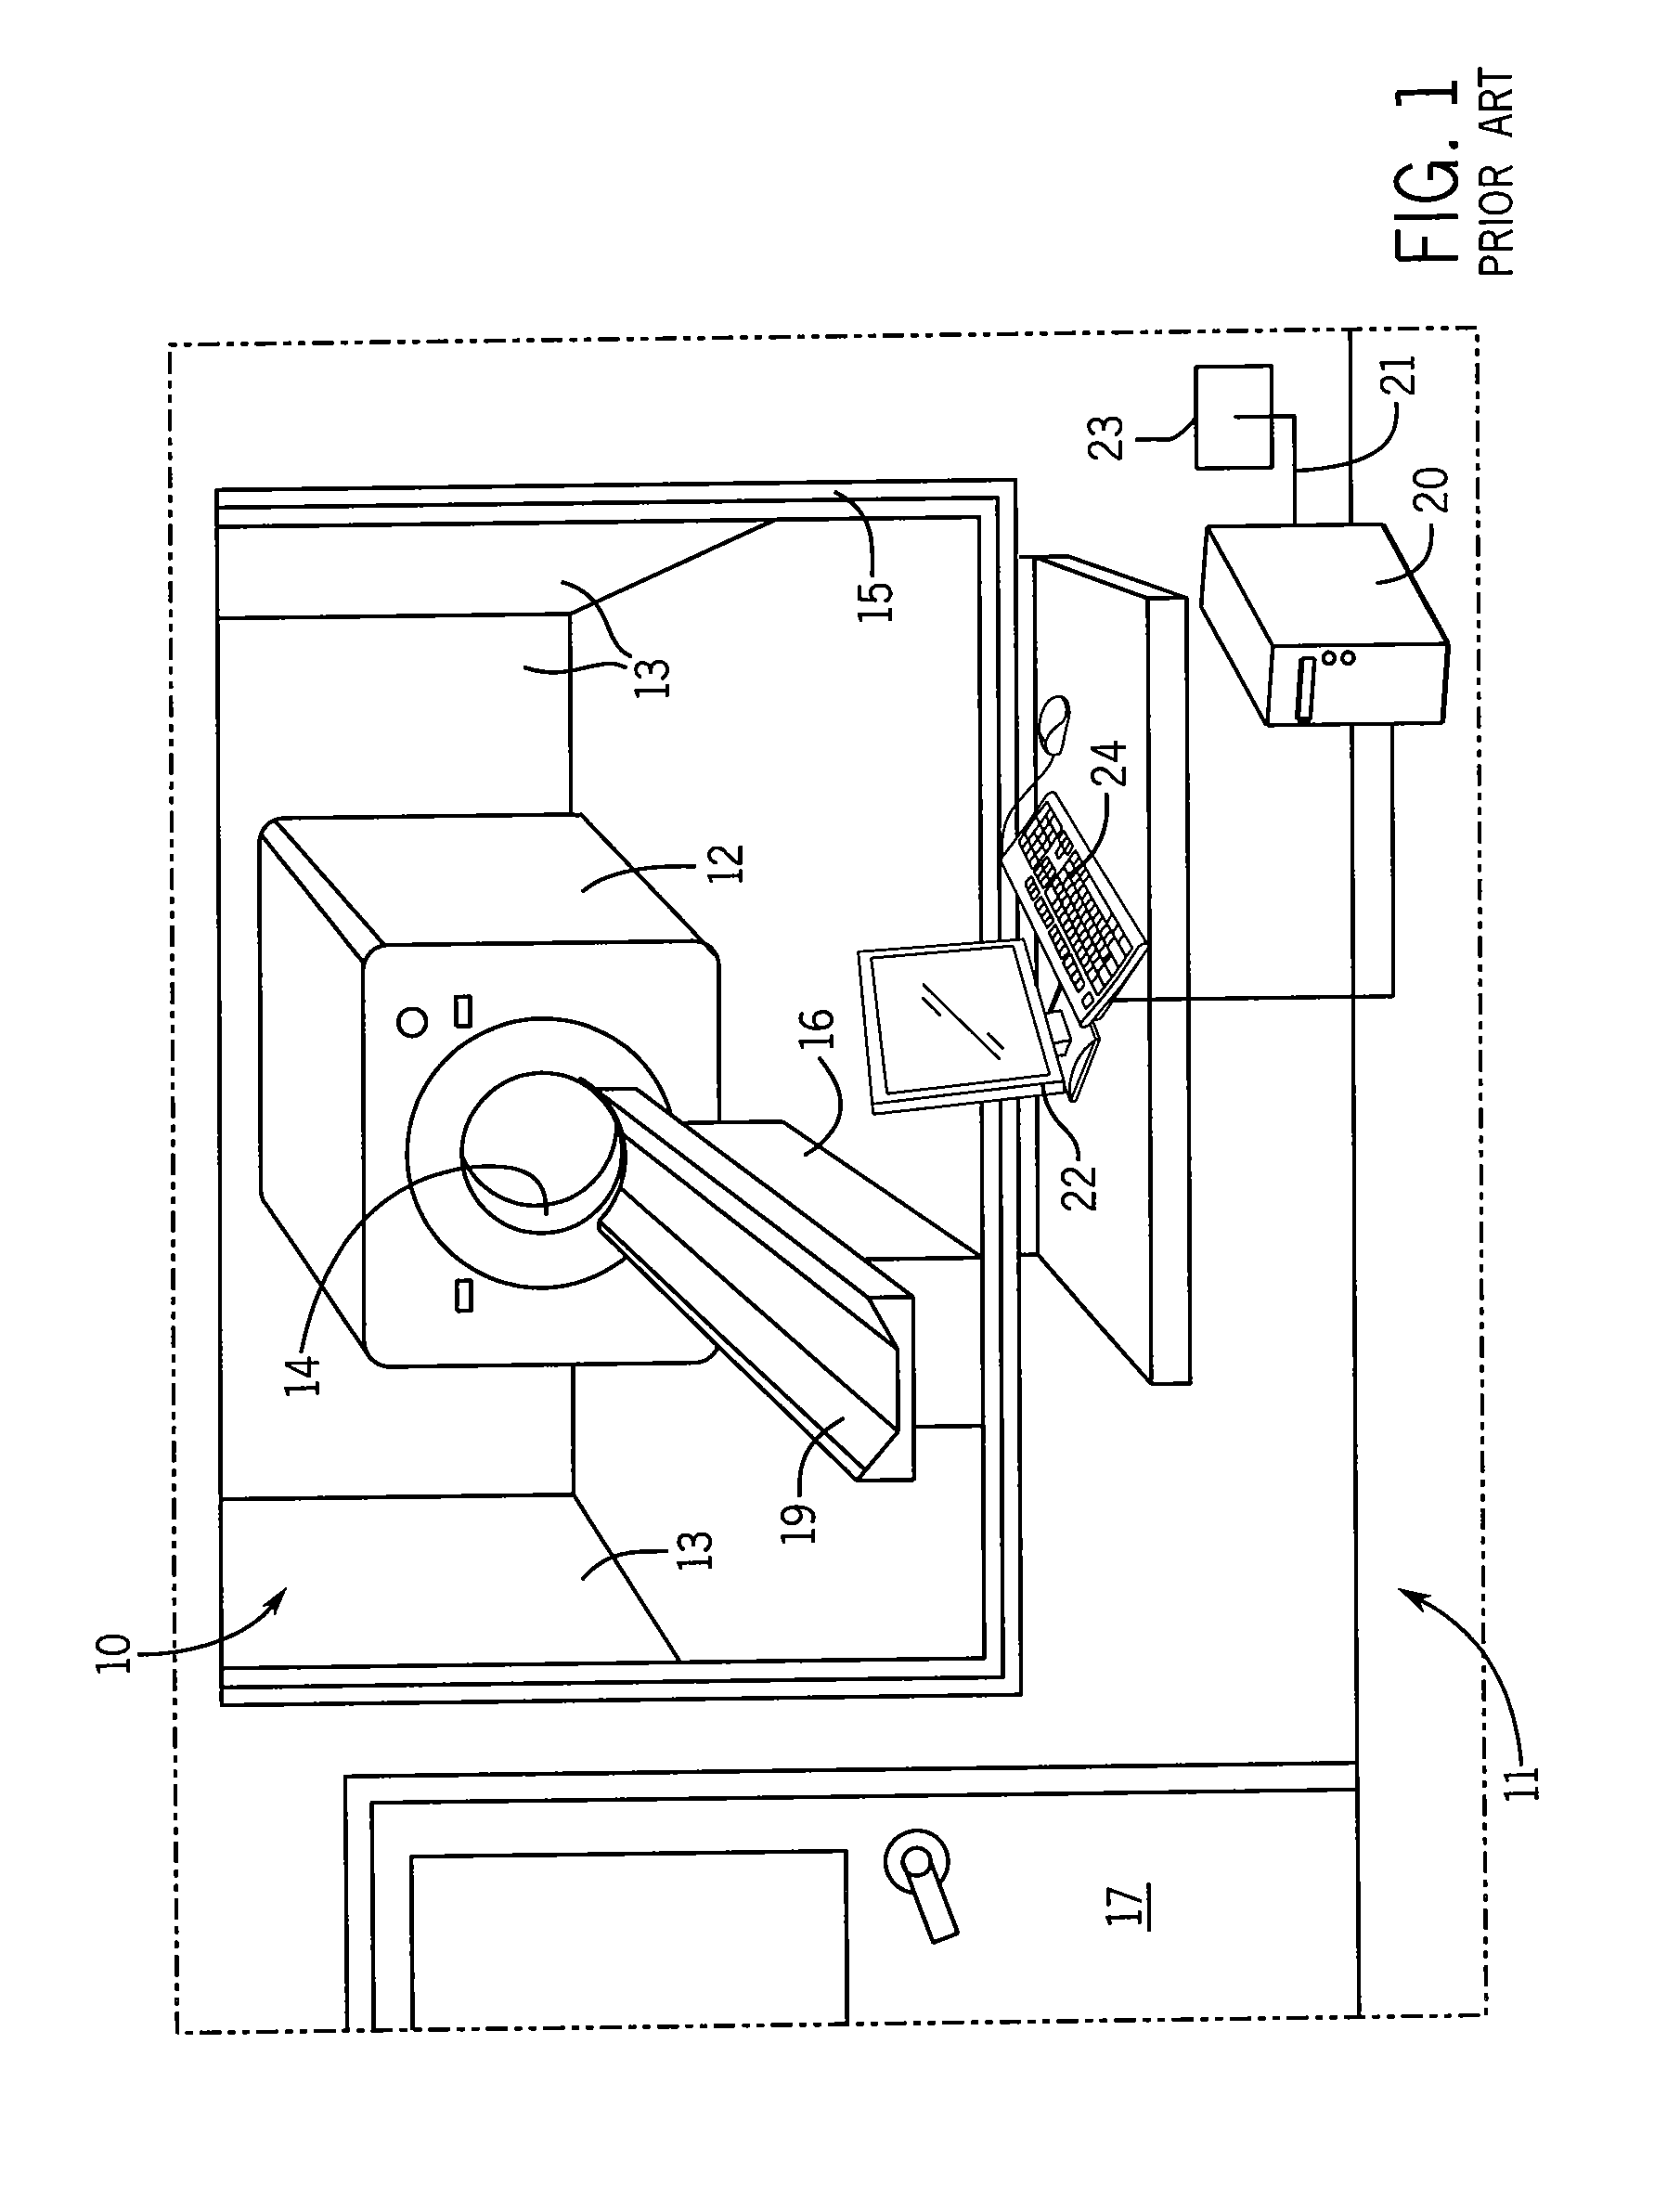 Method and Apparatus for MRI Compatible Communications